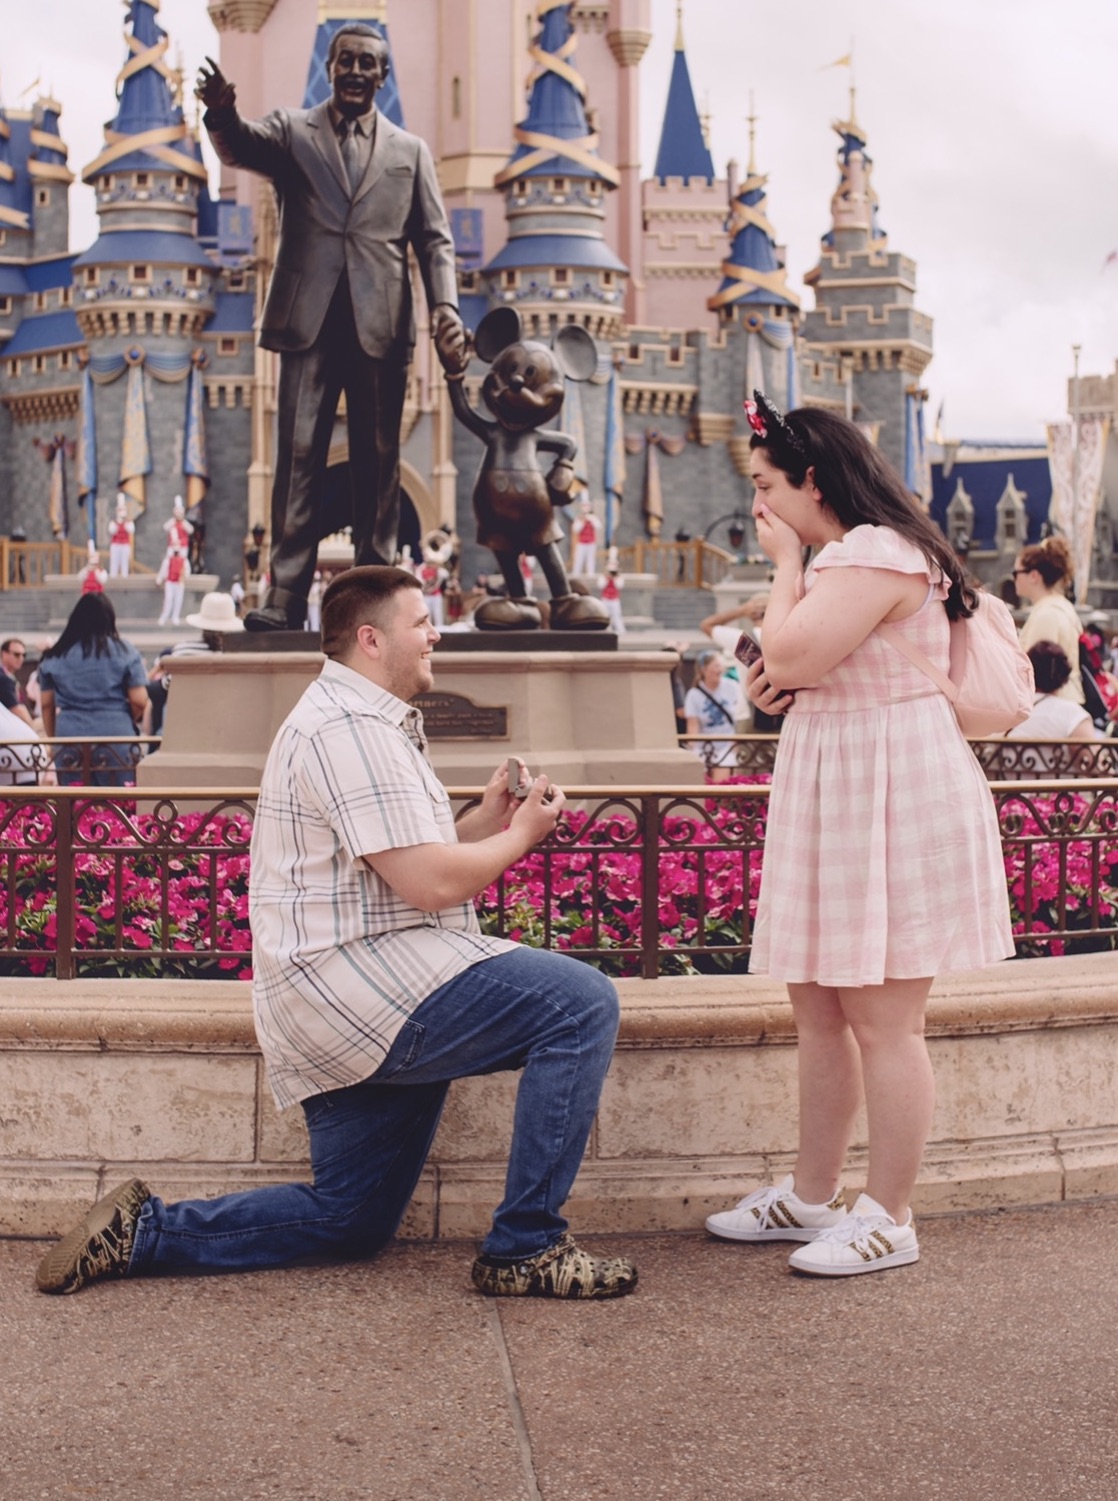 A boy proposing to a girl in front of the Walt Disney statue.